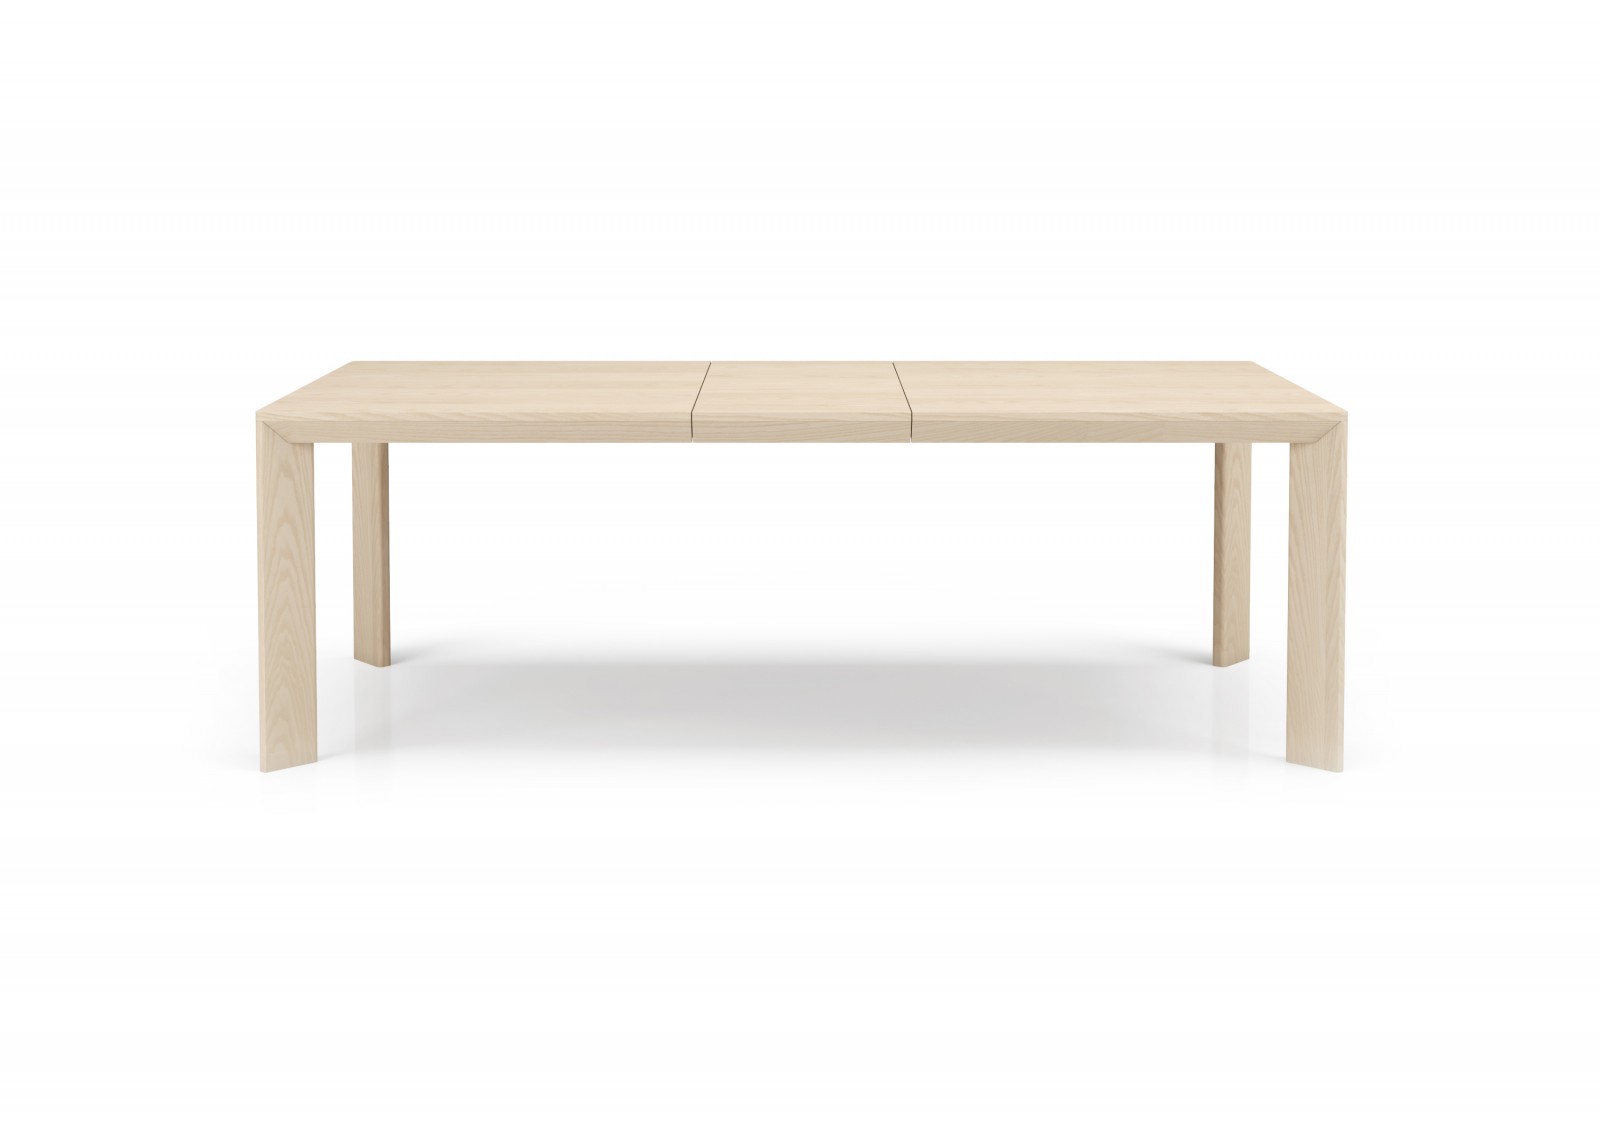 72'' Single extension table